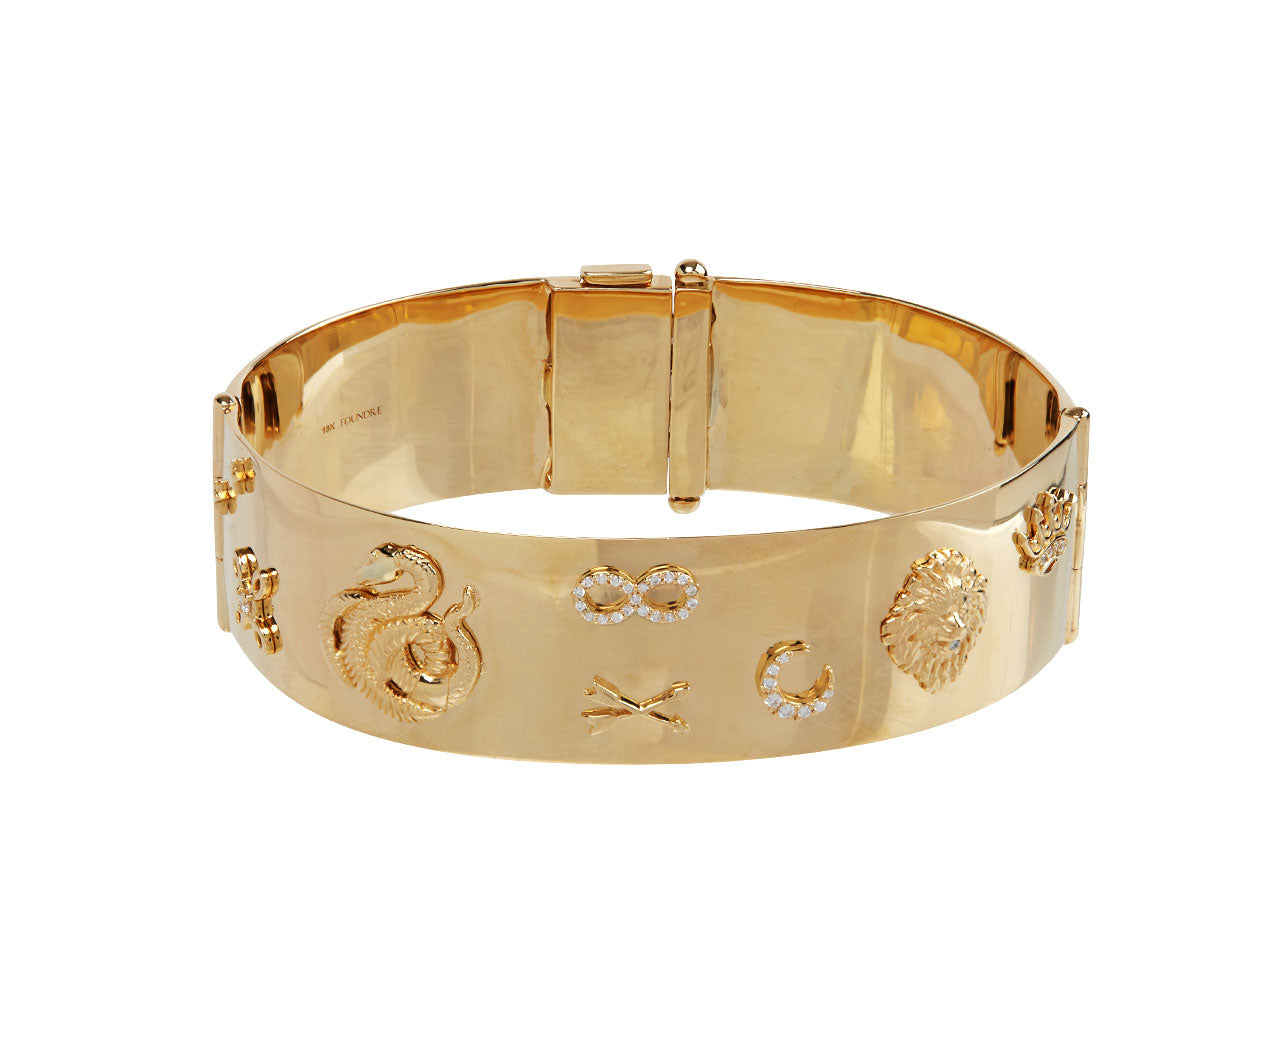 Louis Vuitton Color Blossom Open Bangle, Yellow and White Gold, Onyx and Diamonds Gold. Size S